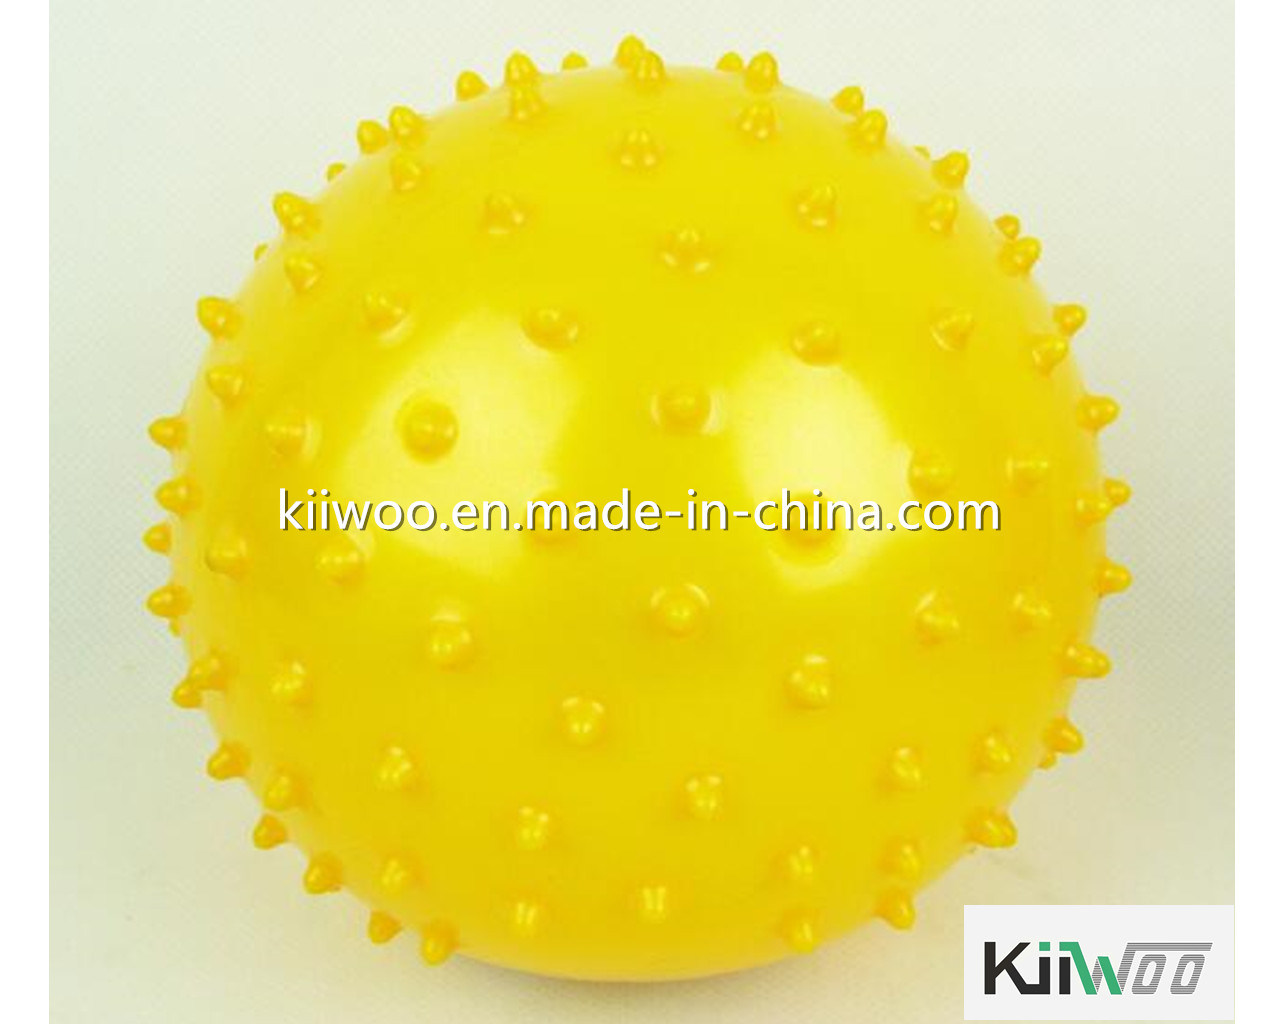 High Quality Colored Silicone Rubber Toy Ball